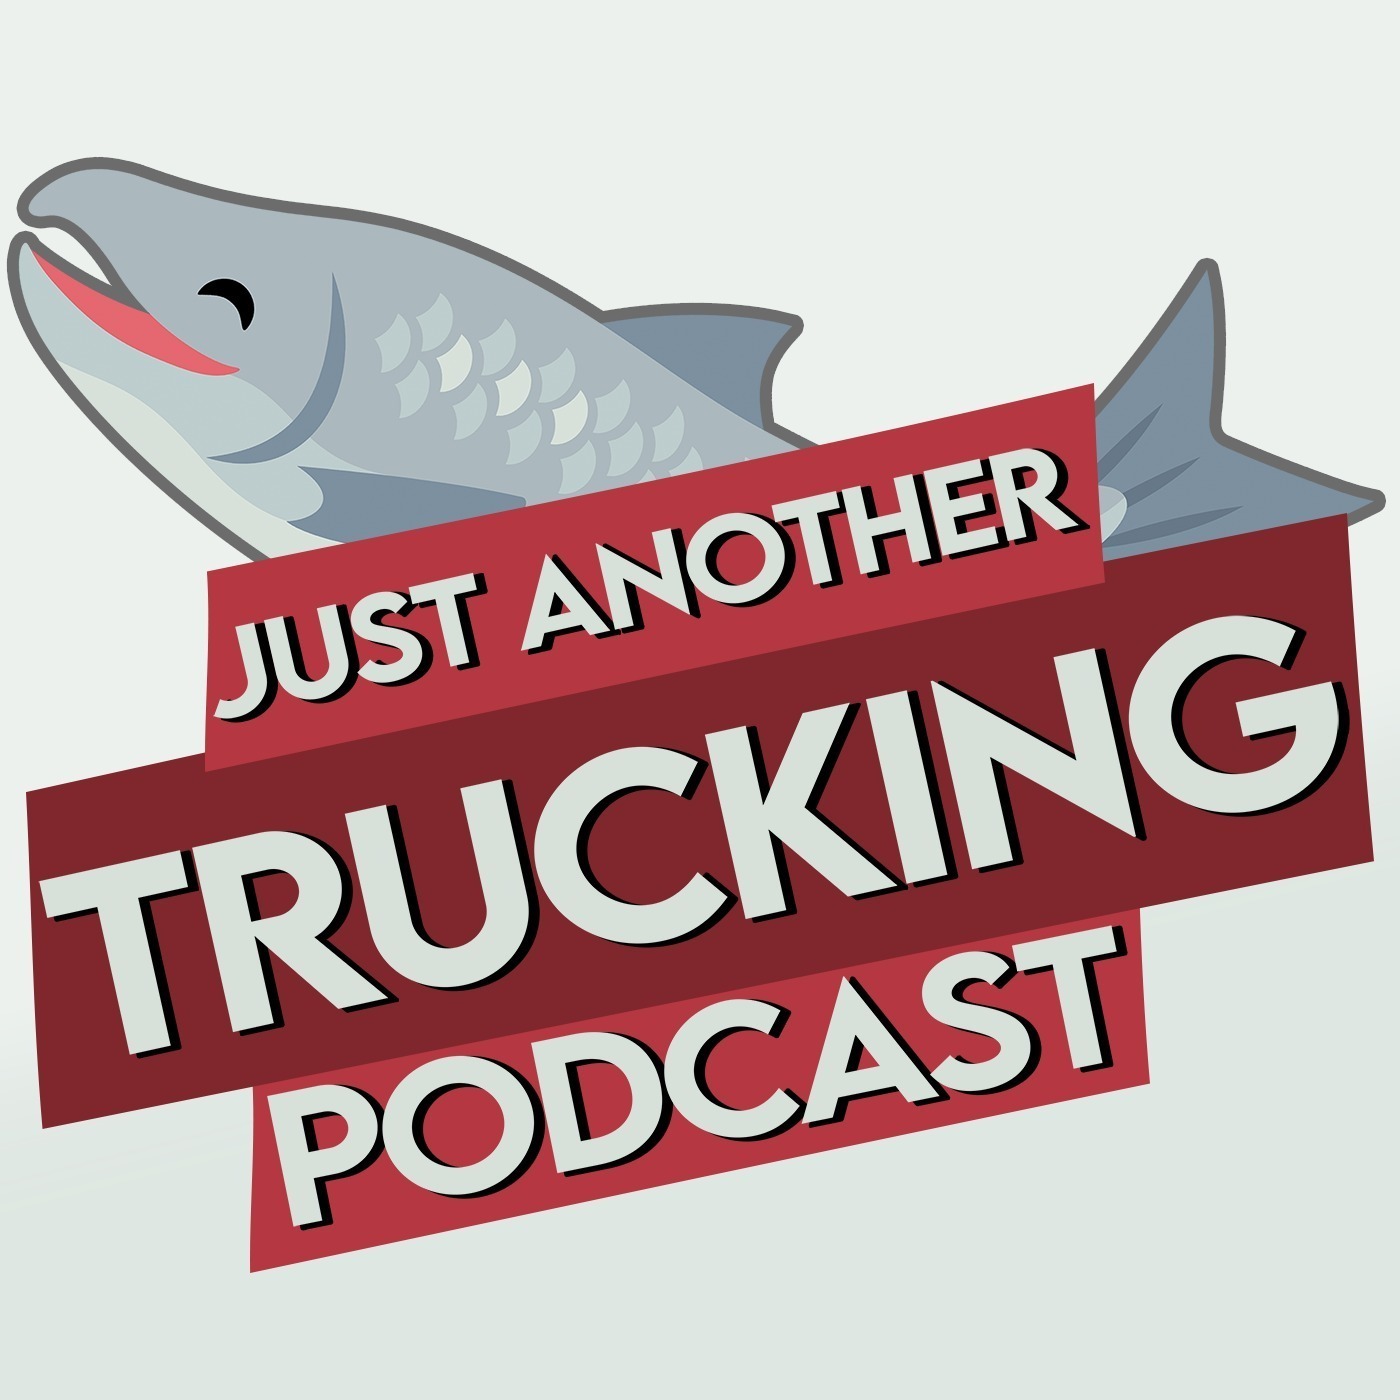 Why don't truckerS take sick days? Just Another Trucking Podcast